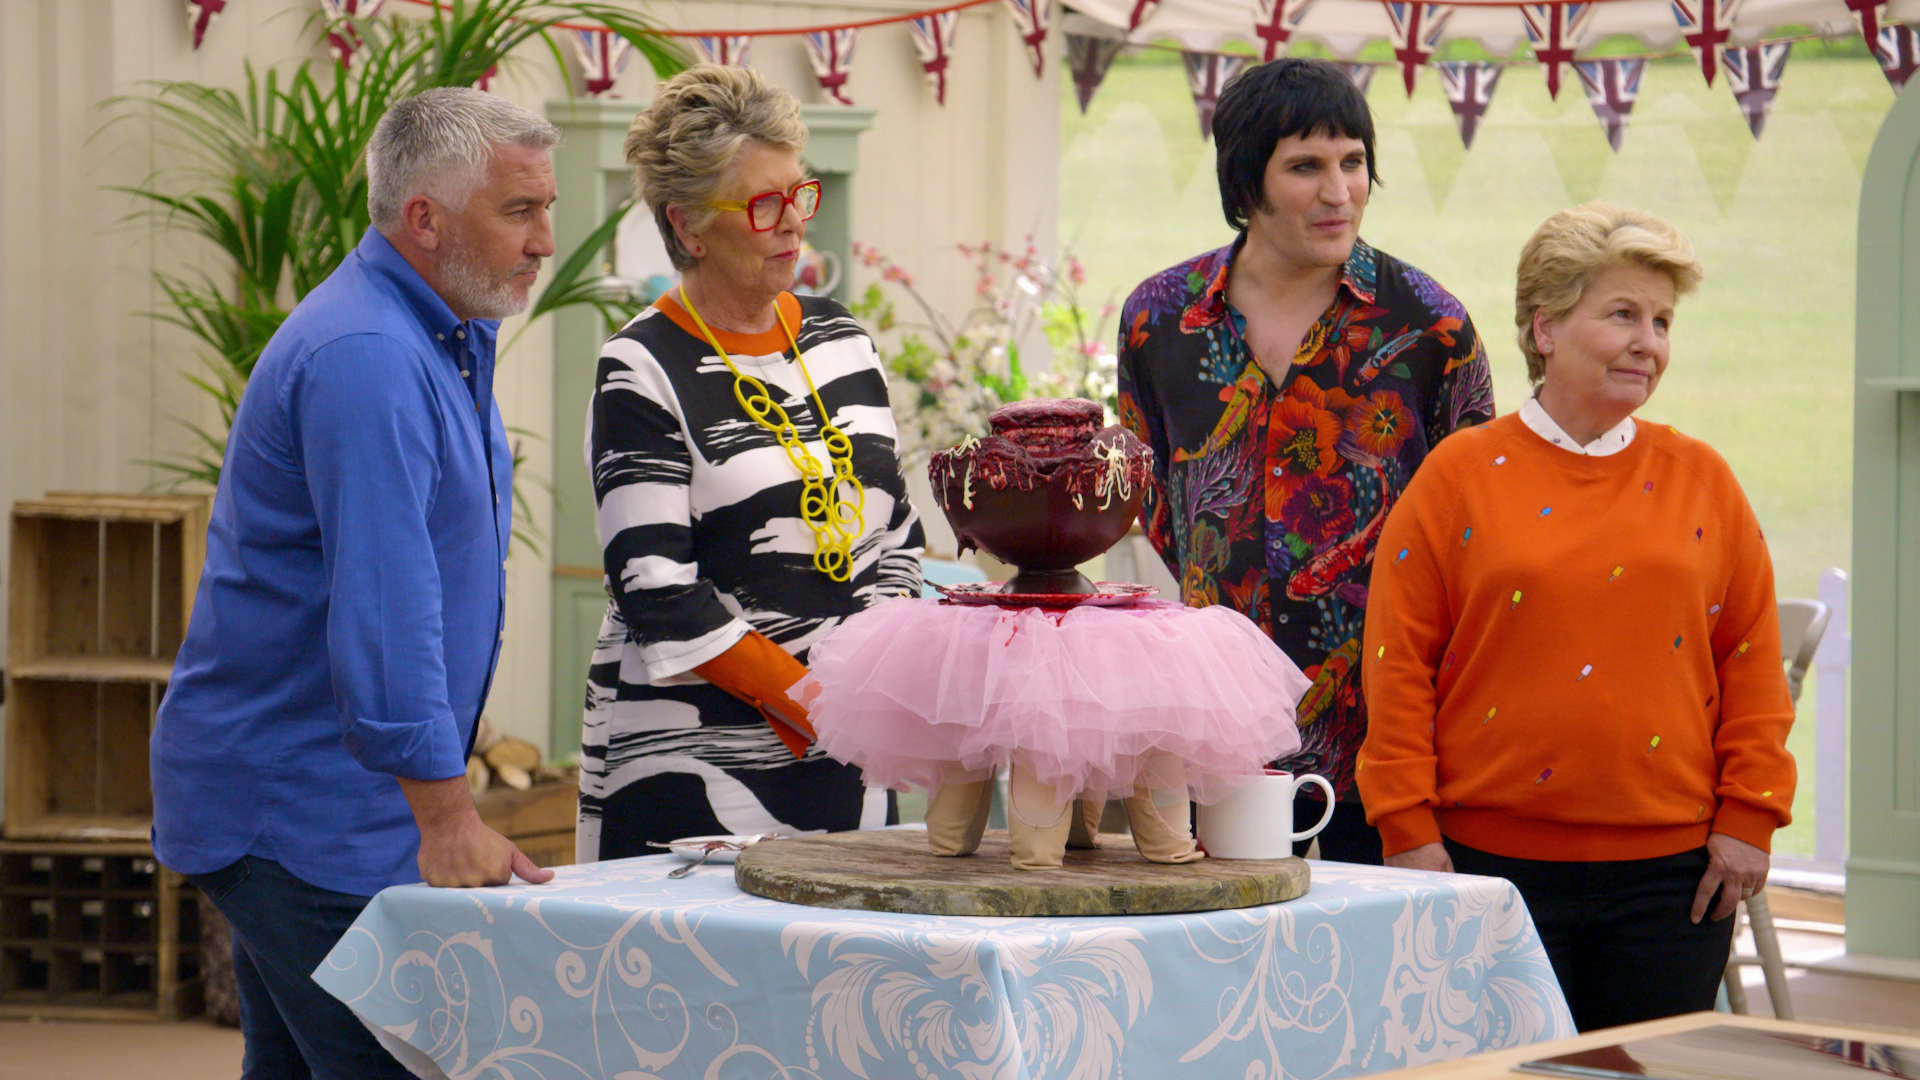 Picture shows: Paul Hollywood, Prue Leith, Noel Fielding, and Sandi Toksvig in The Great British Baking Show Season 8